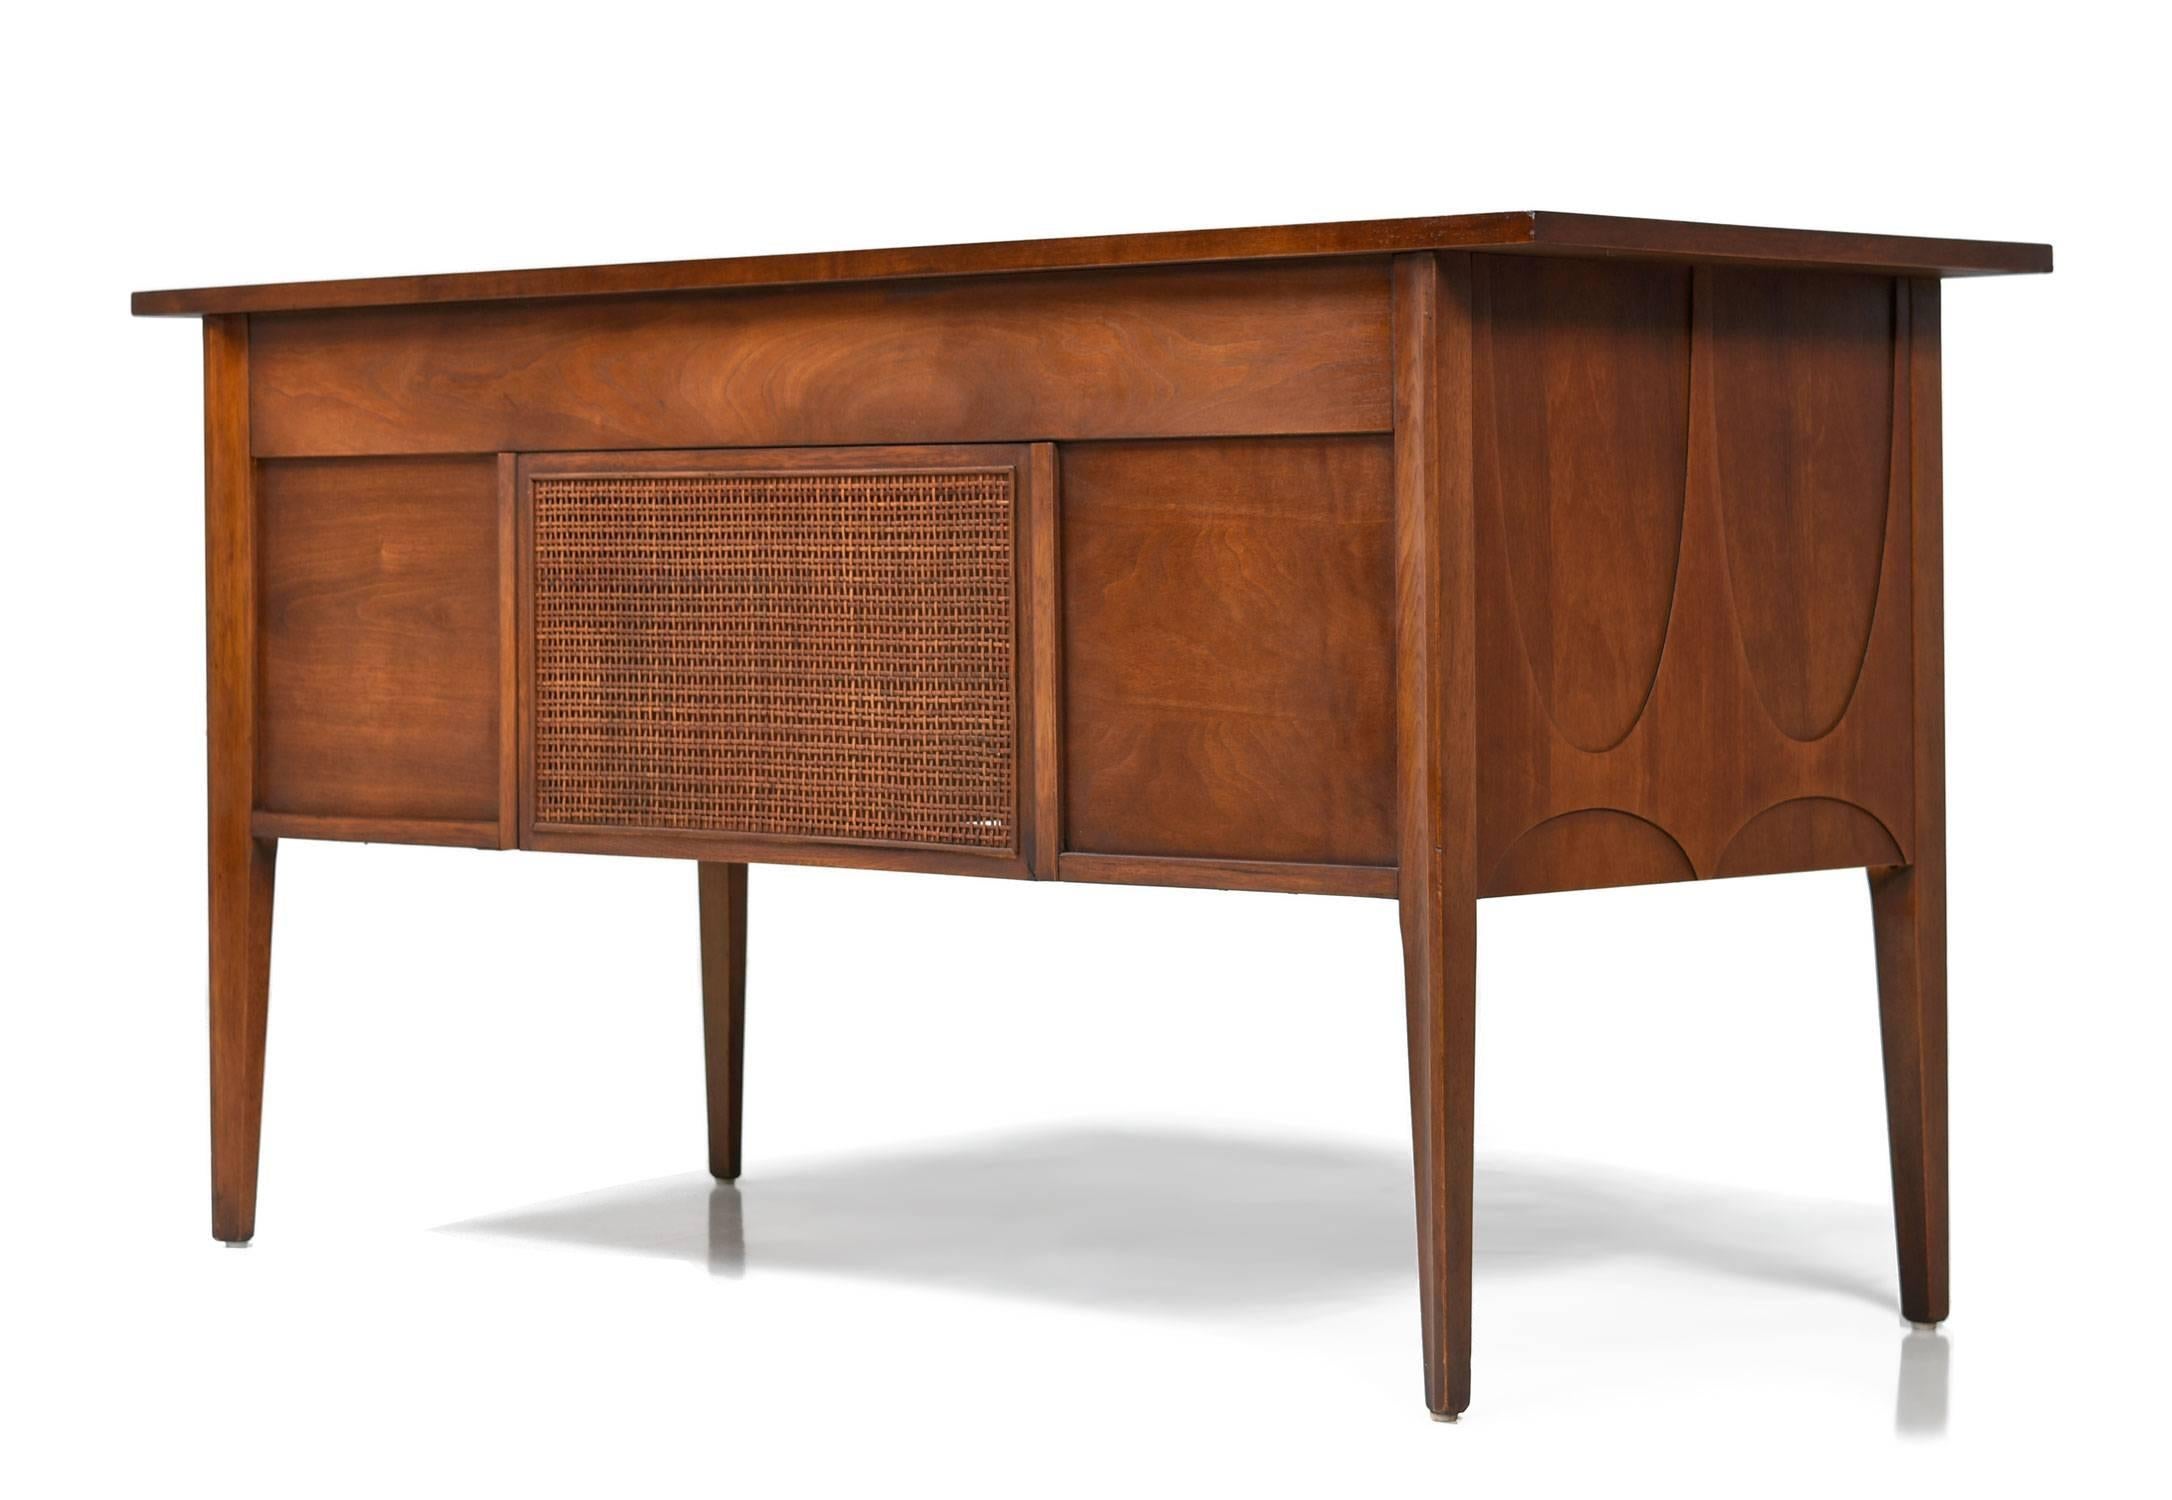 Mid-Century Modern Broyhill Brasilia desk. One of the most beloved collections from the American Mid-Century canon. Designed by Oscar Niemeyer for Broyhill. Vintage, 1960s. Walnut wood construction with original brass pulls. The desk features